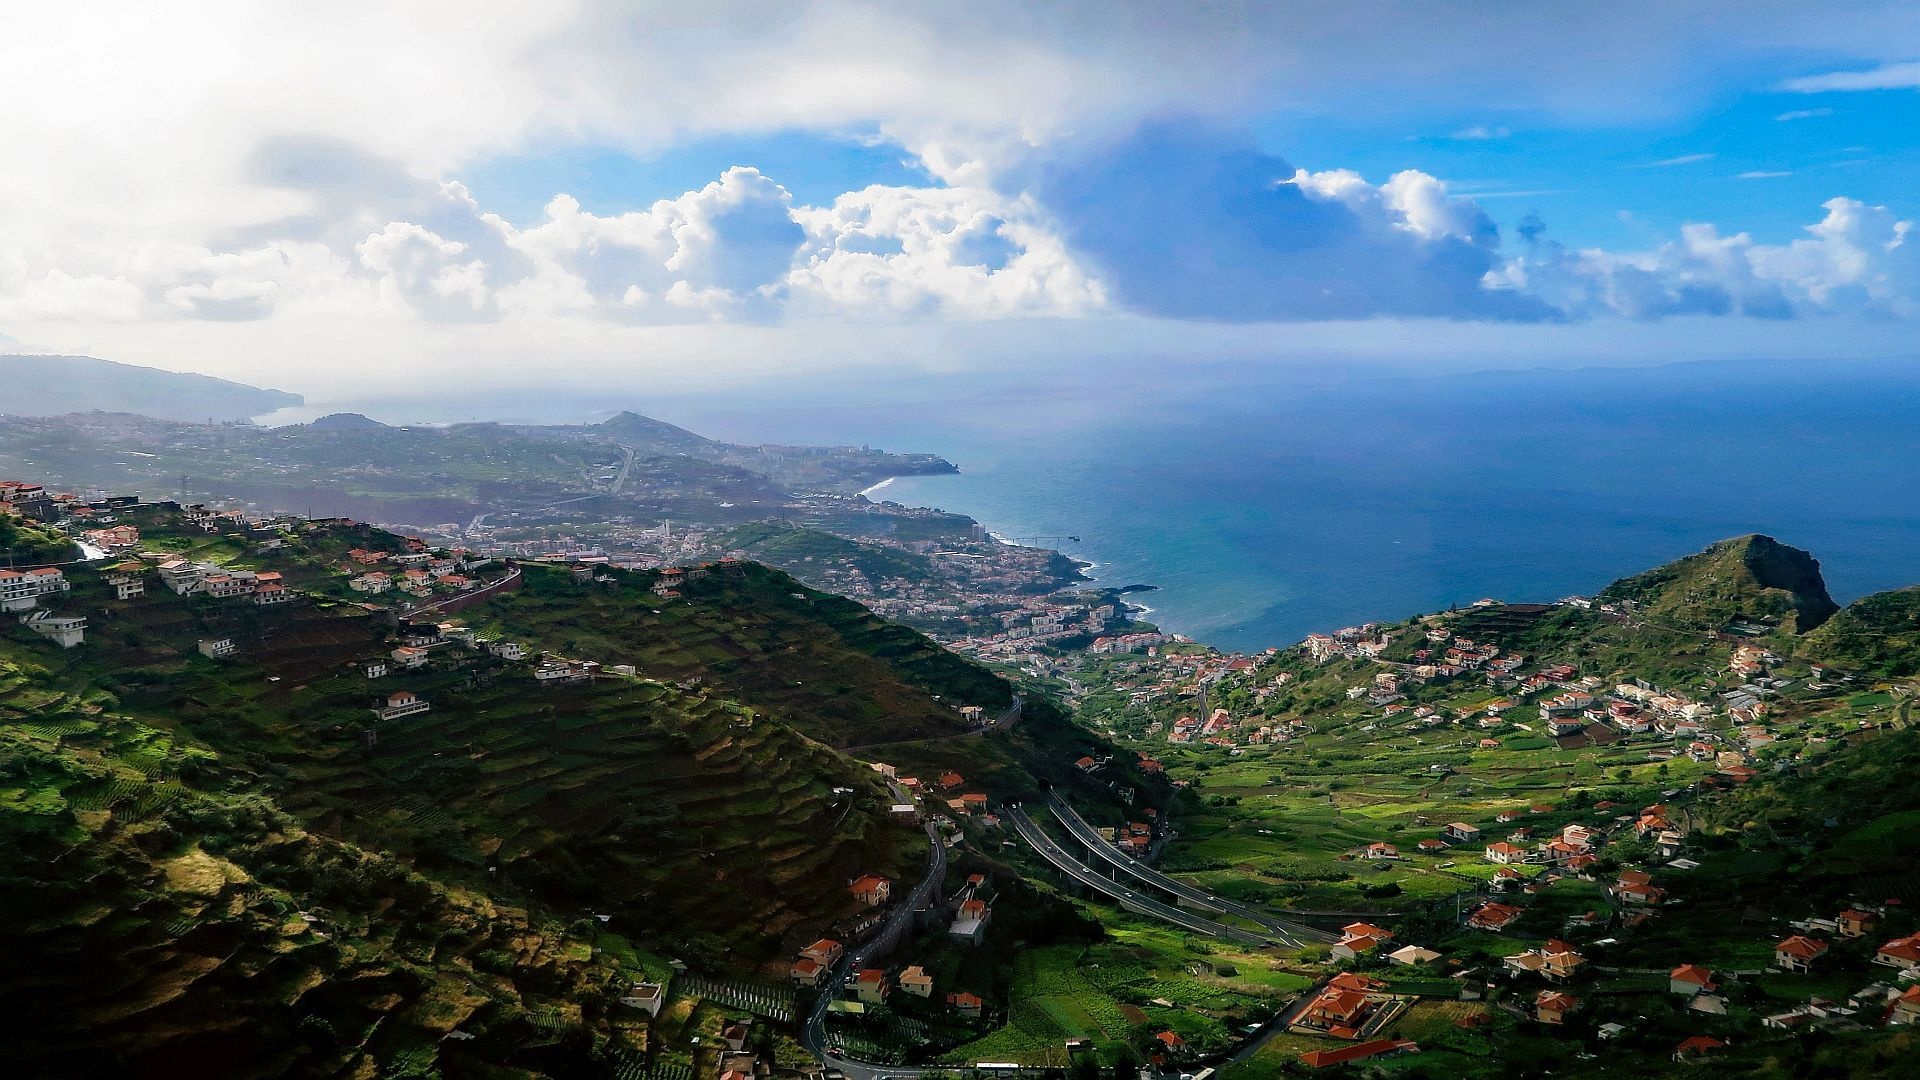 Madeira travels, Vivid wallpapers, Breath-taking landscapes, Nature's beauty, 1920x1080 Full HD Desktop